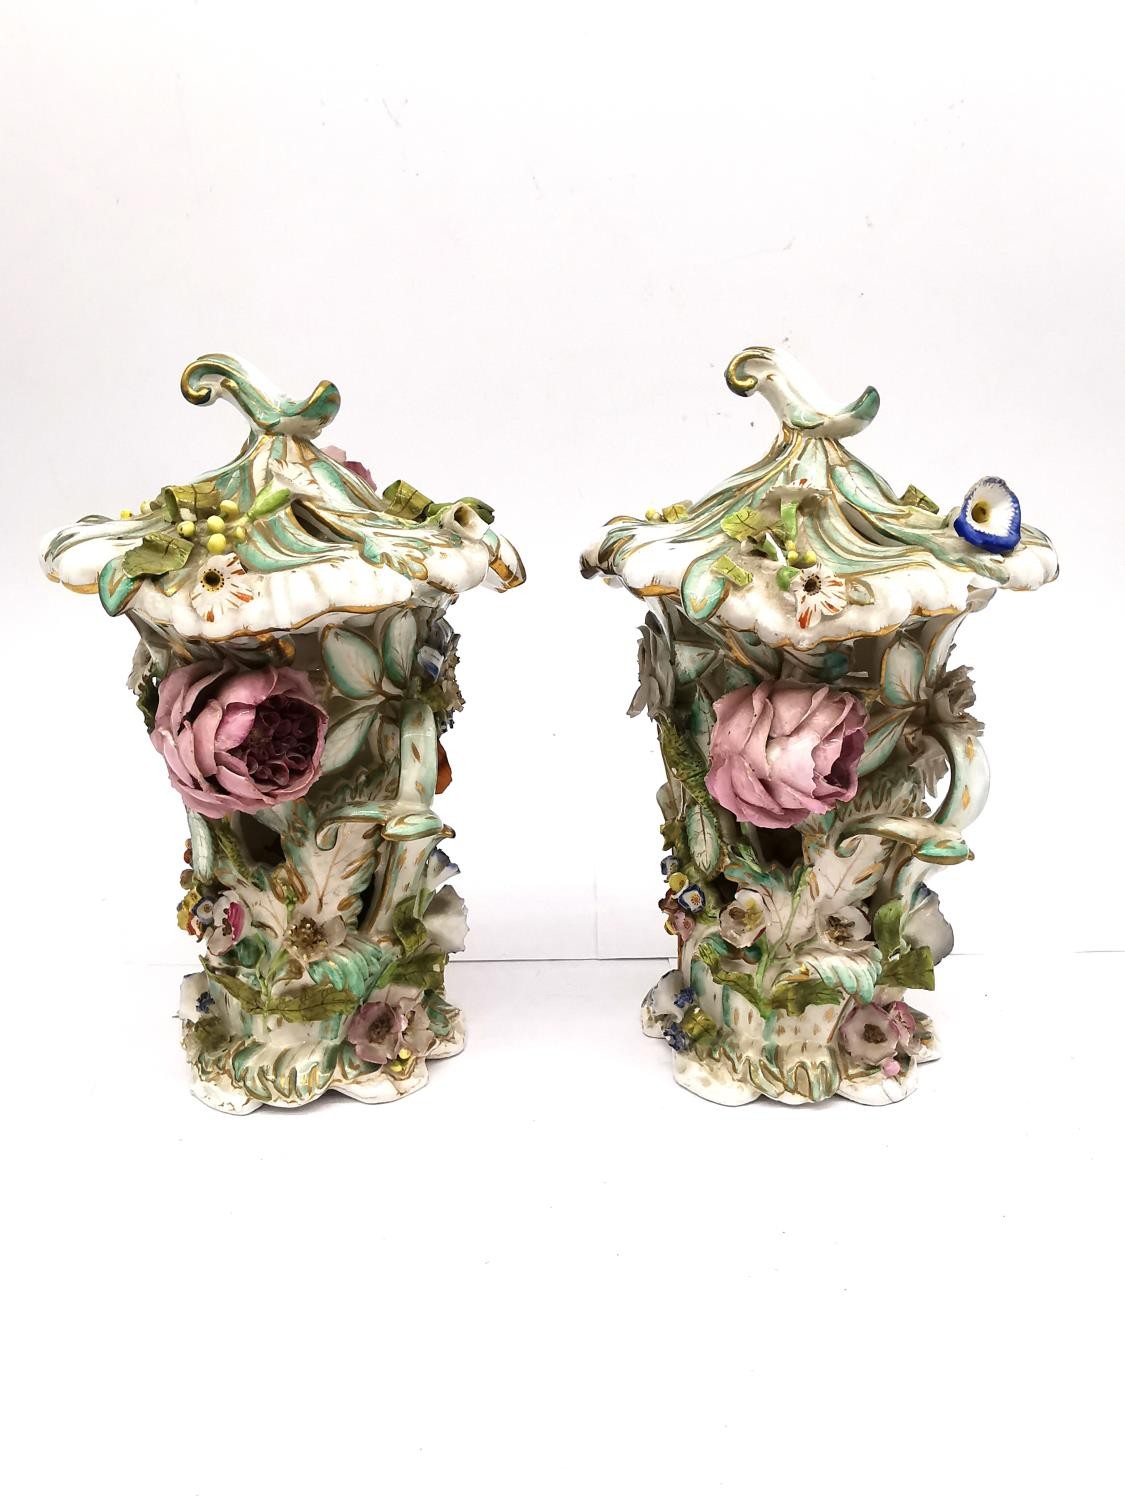 A pair of mid 19th century Bloor Derby floral encrusted hand painted porcelain Potpourri lidded